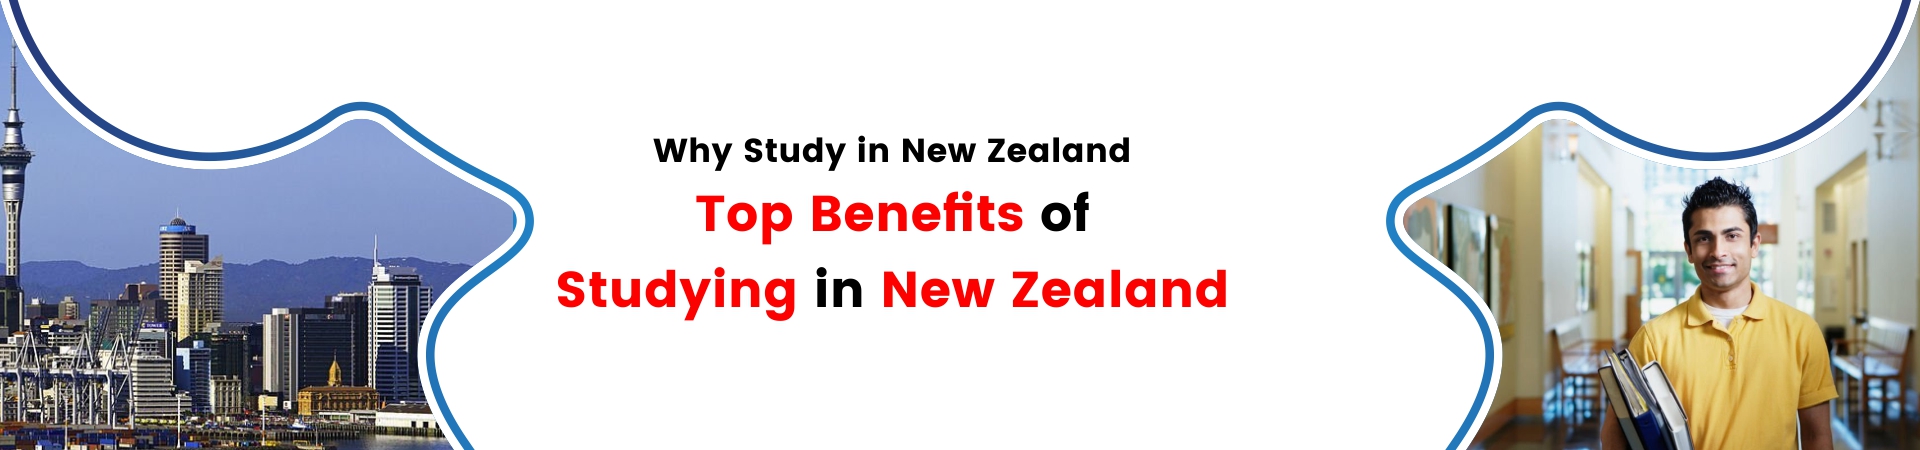 Why Study in New Zealand: Top Benefits of Studying in New Zealand